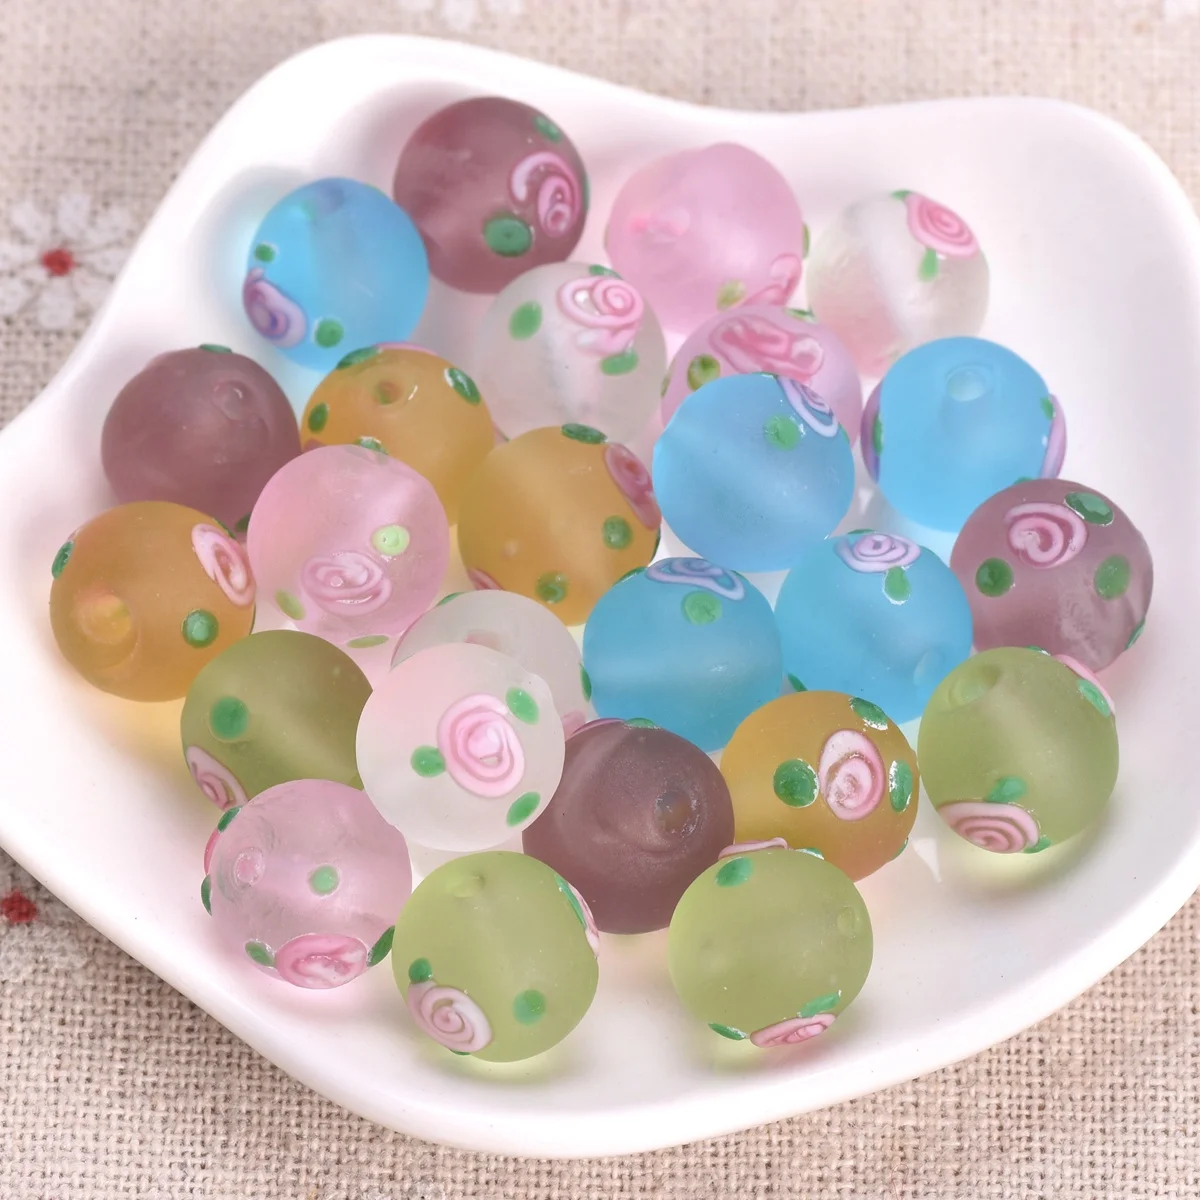 1pcs Big Round 20mm Handmade Flower Lampwork Glass Loose Beads for Jewelry  Making DIY Crafts Findings